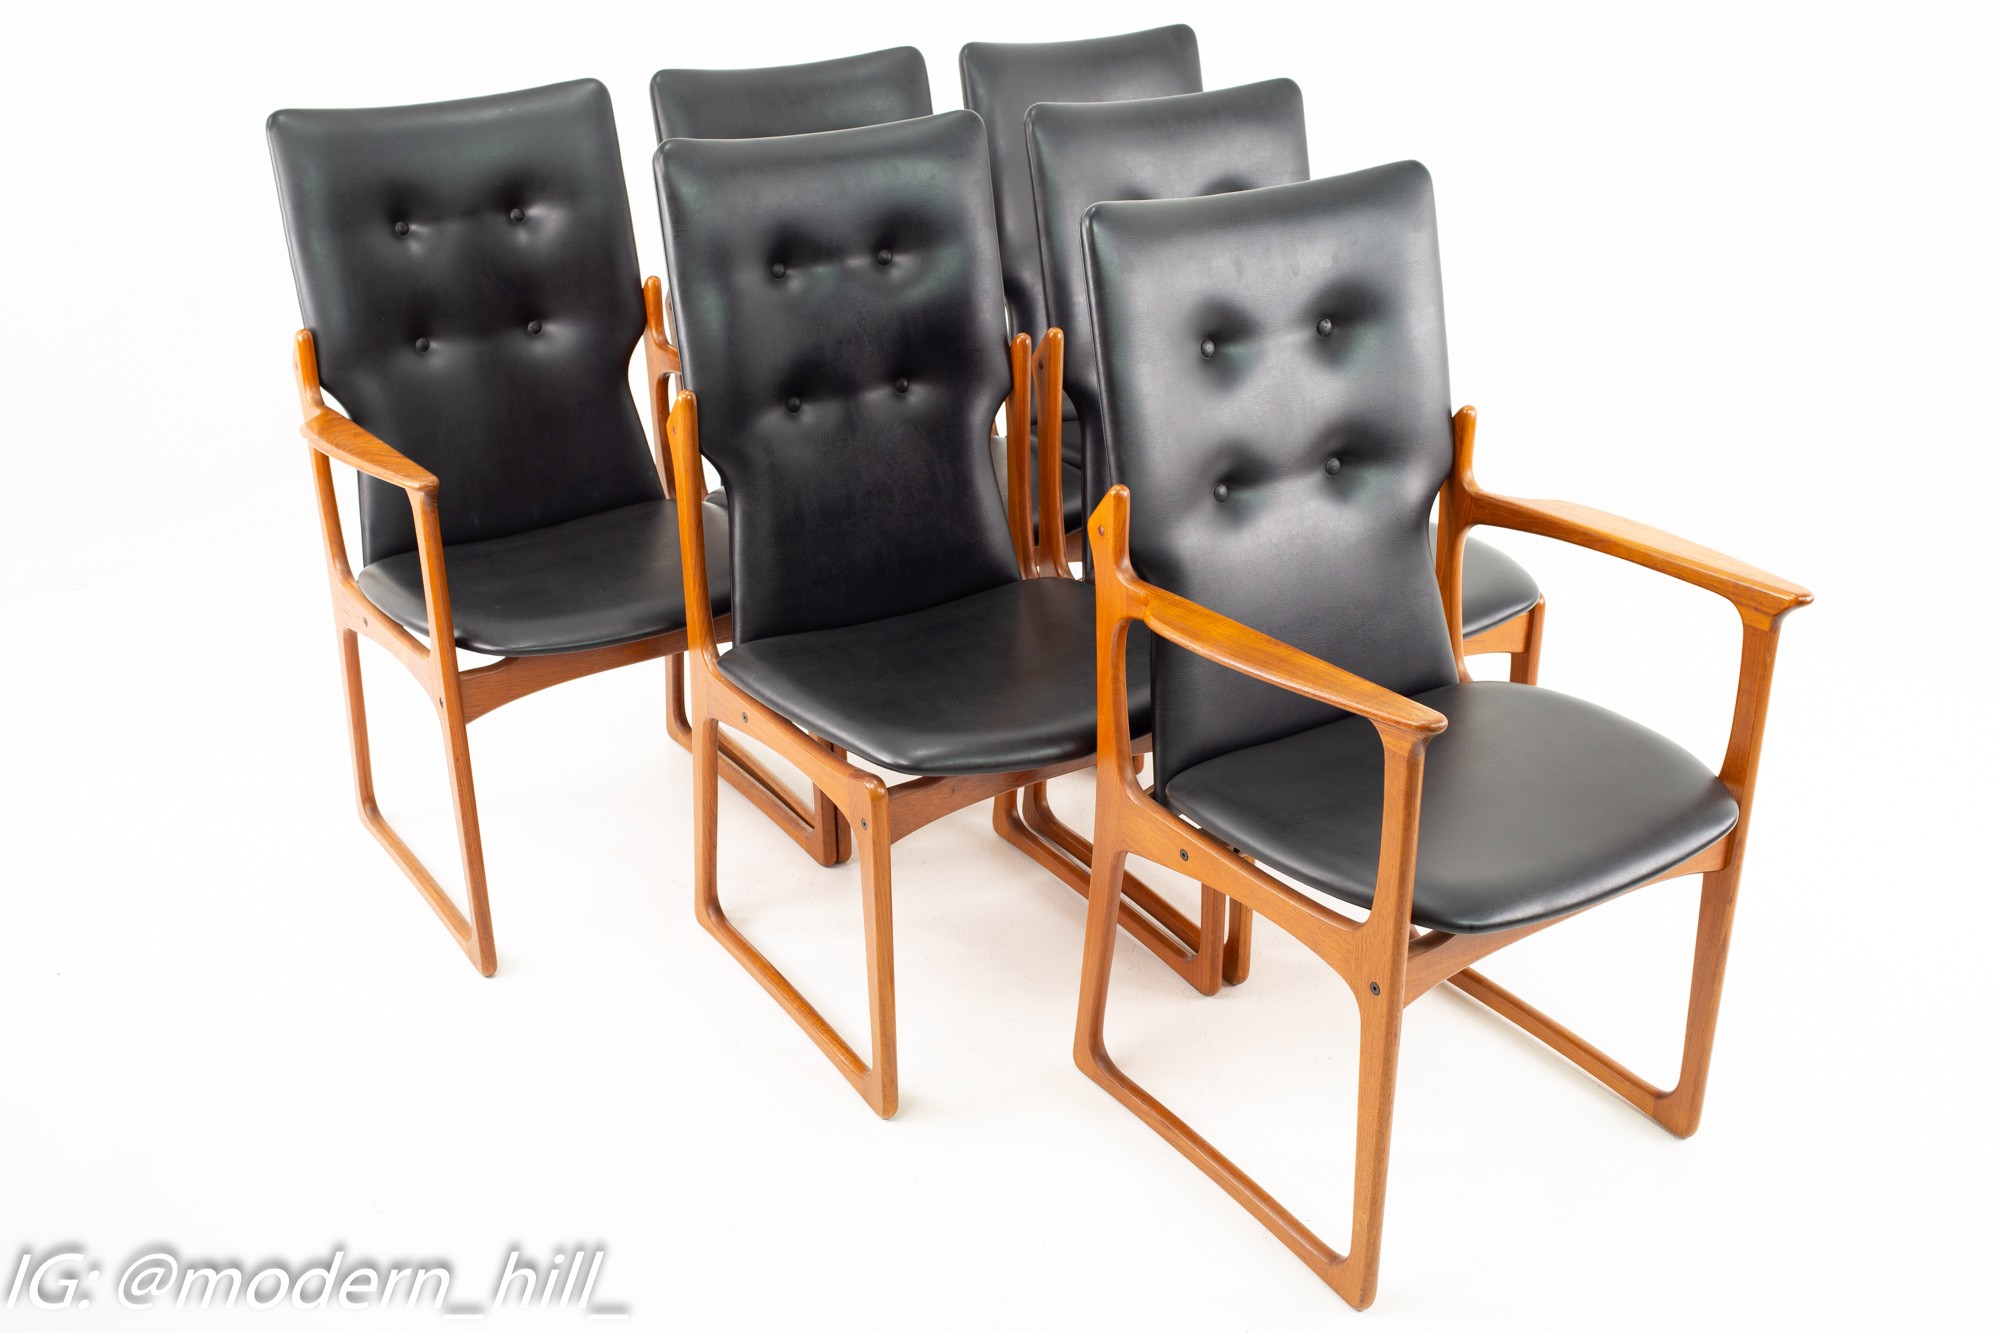 Art Furniture Mid Century High Back Chairs - Set of 6